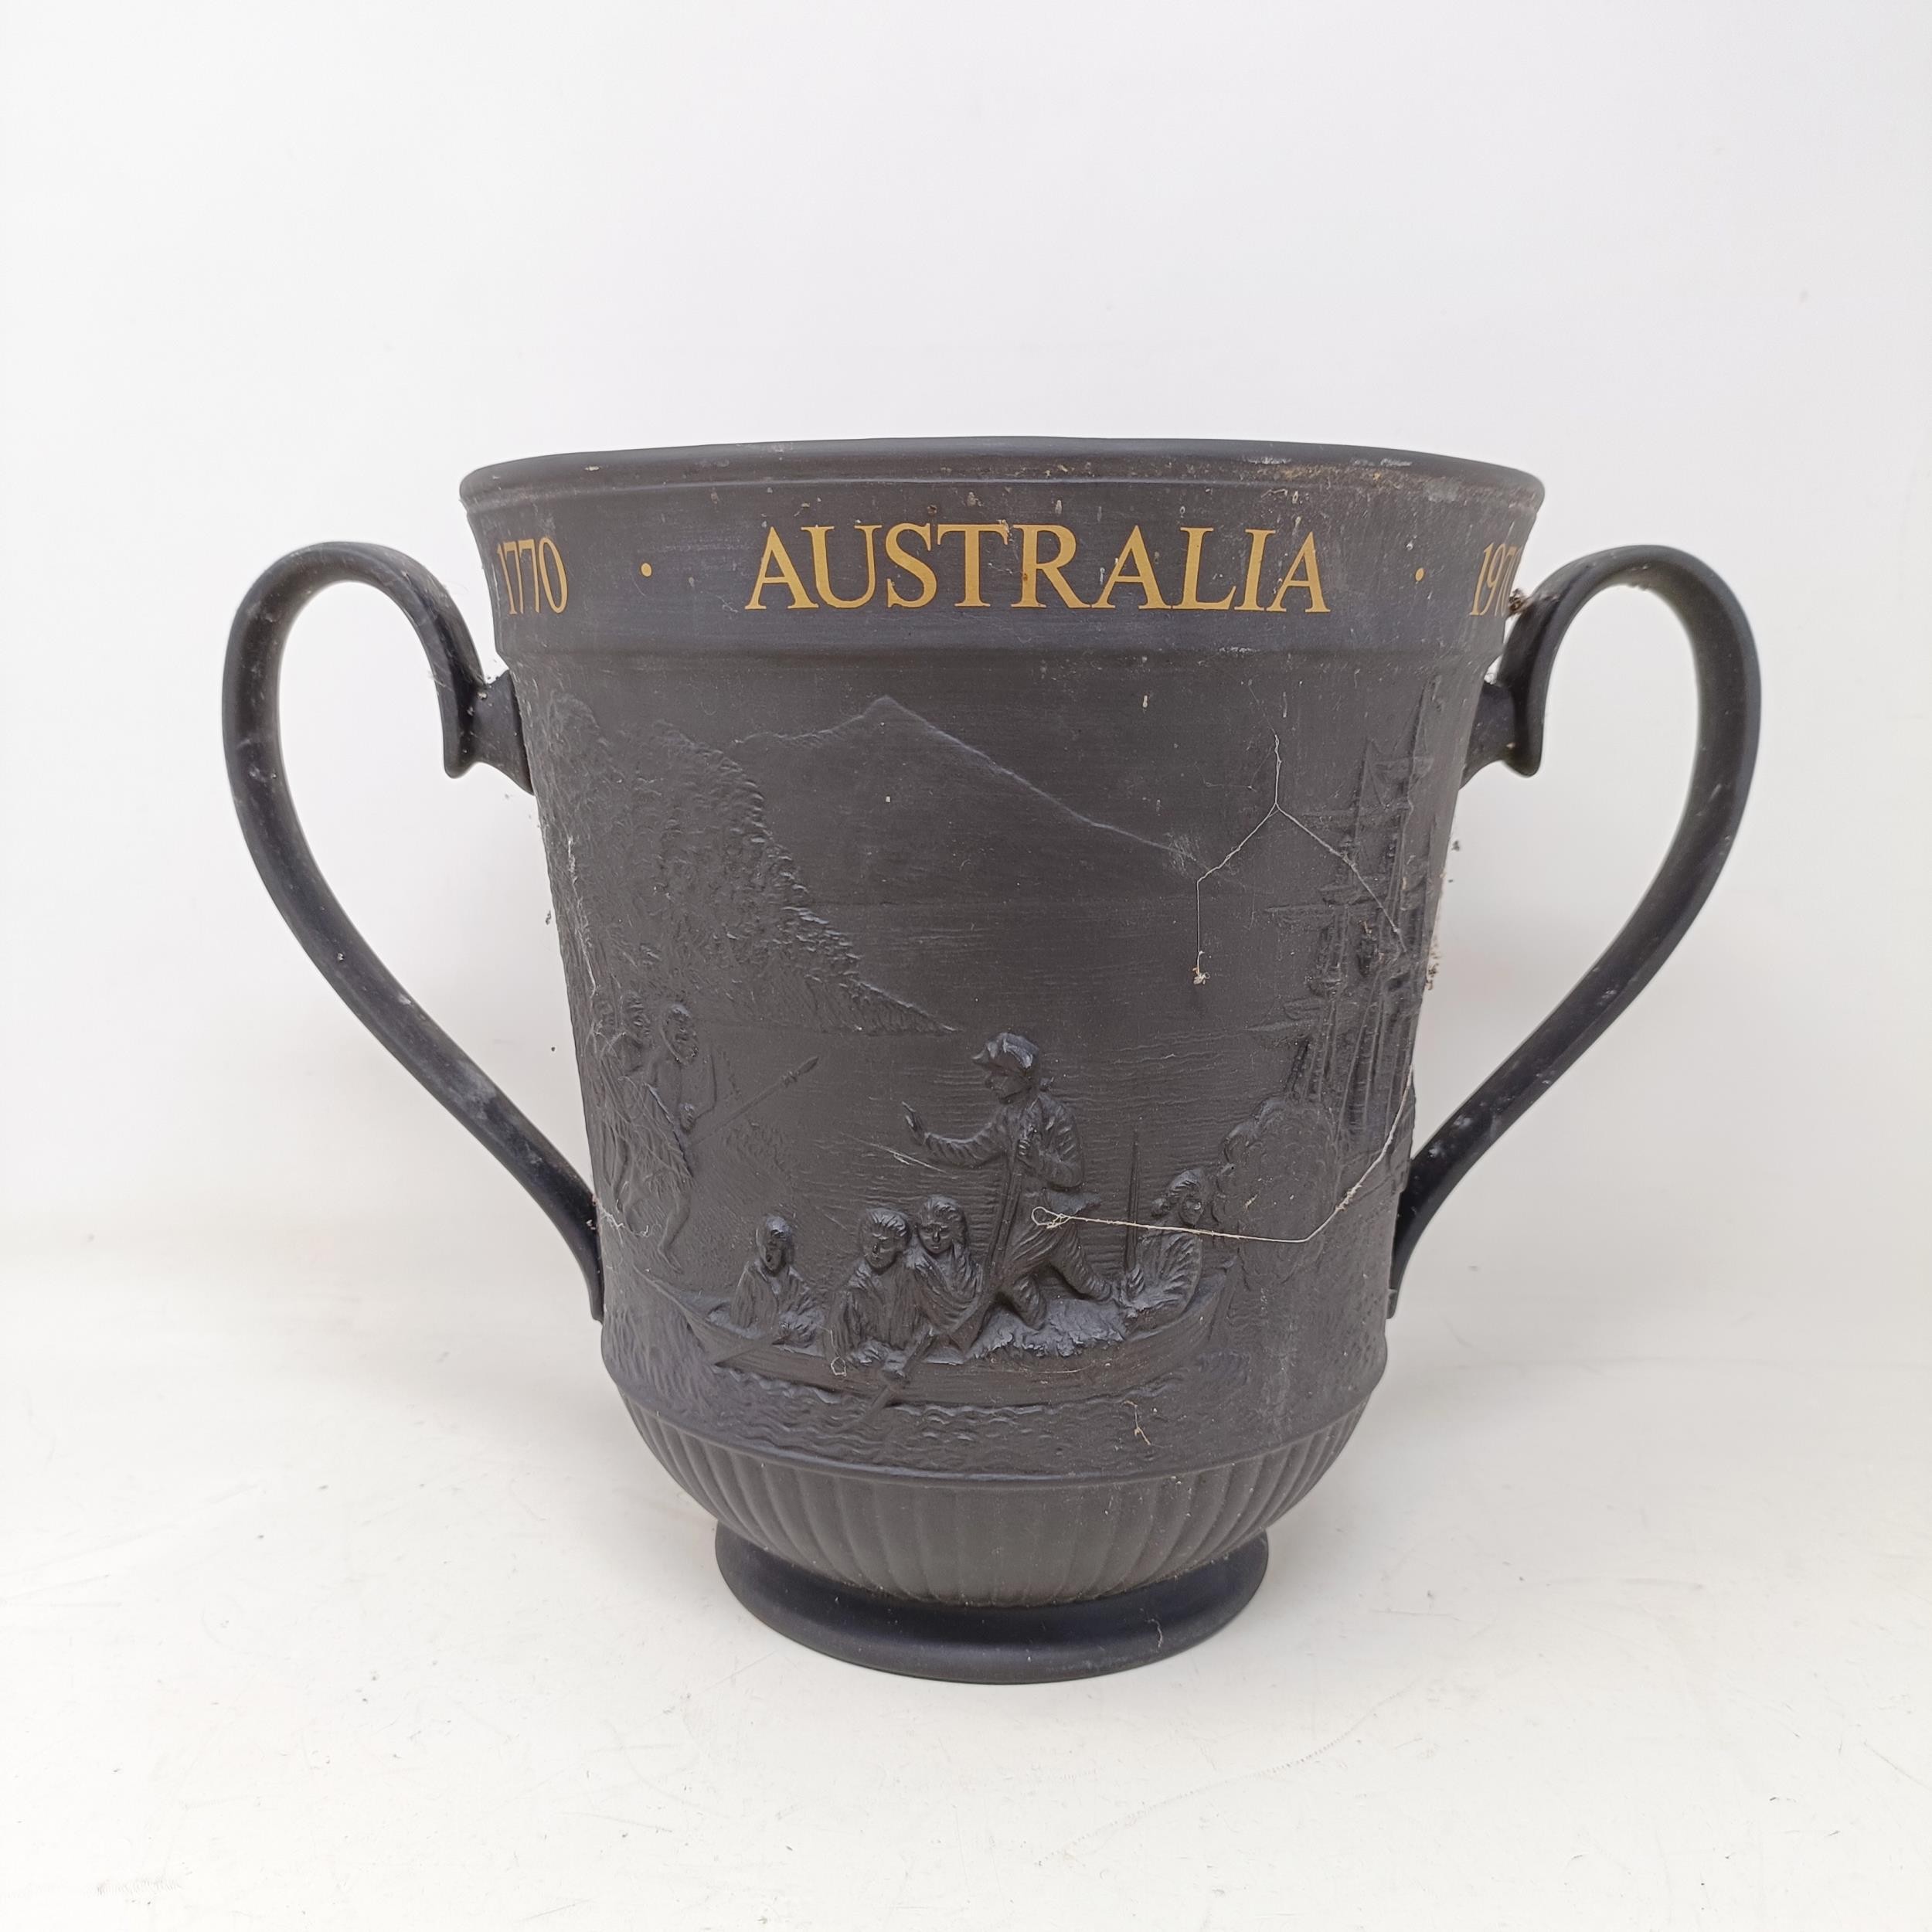 A Royal Doulton limited edition commemorative two handled cup, commemorating the 200th Anniversary